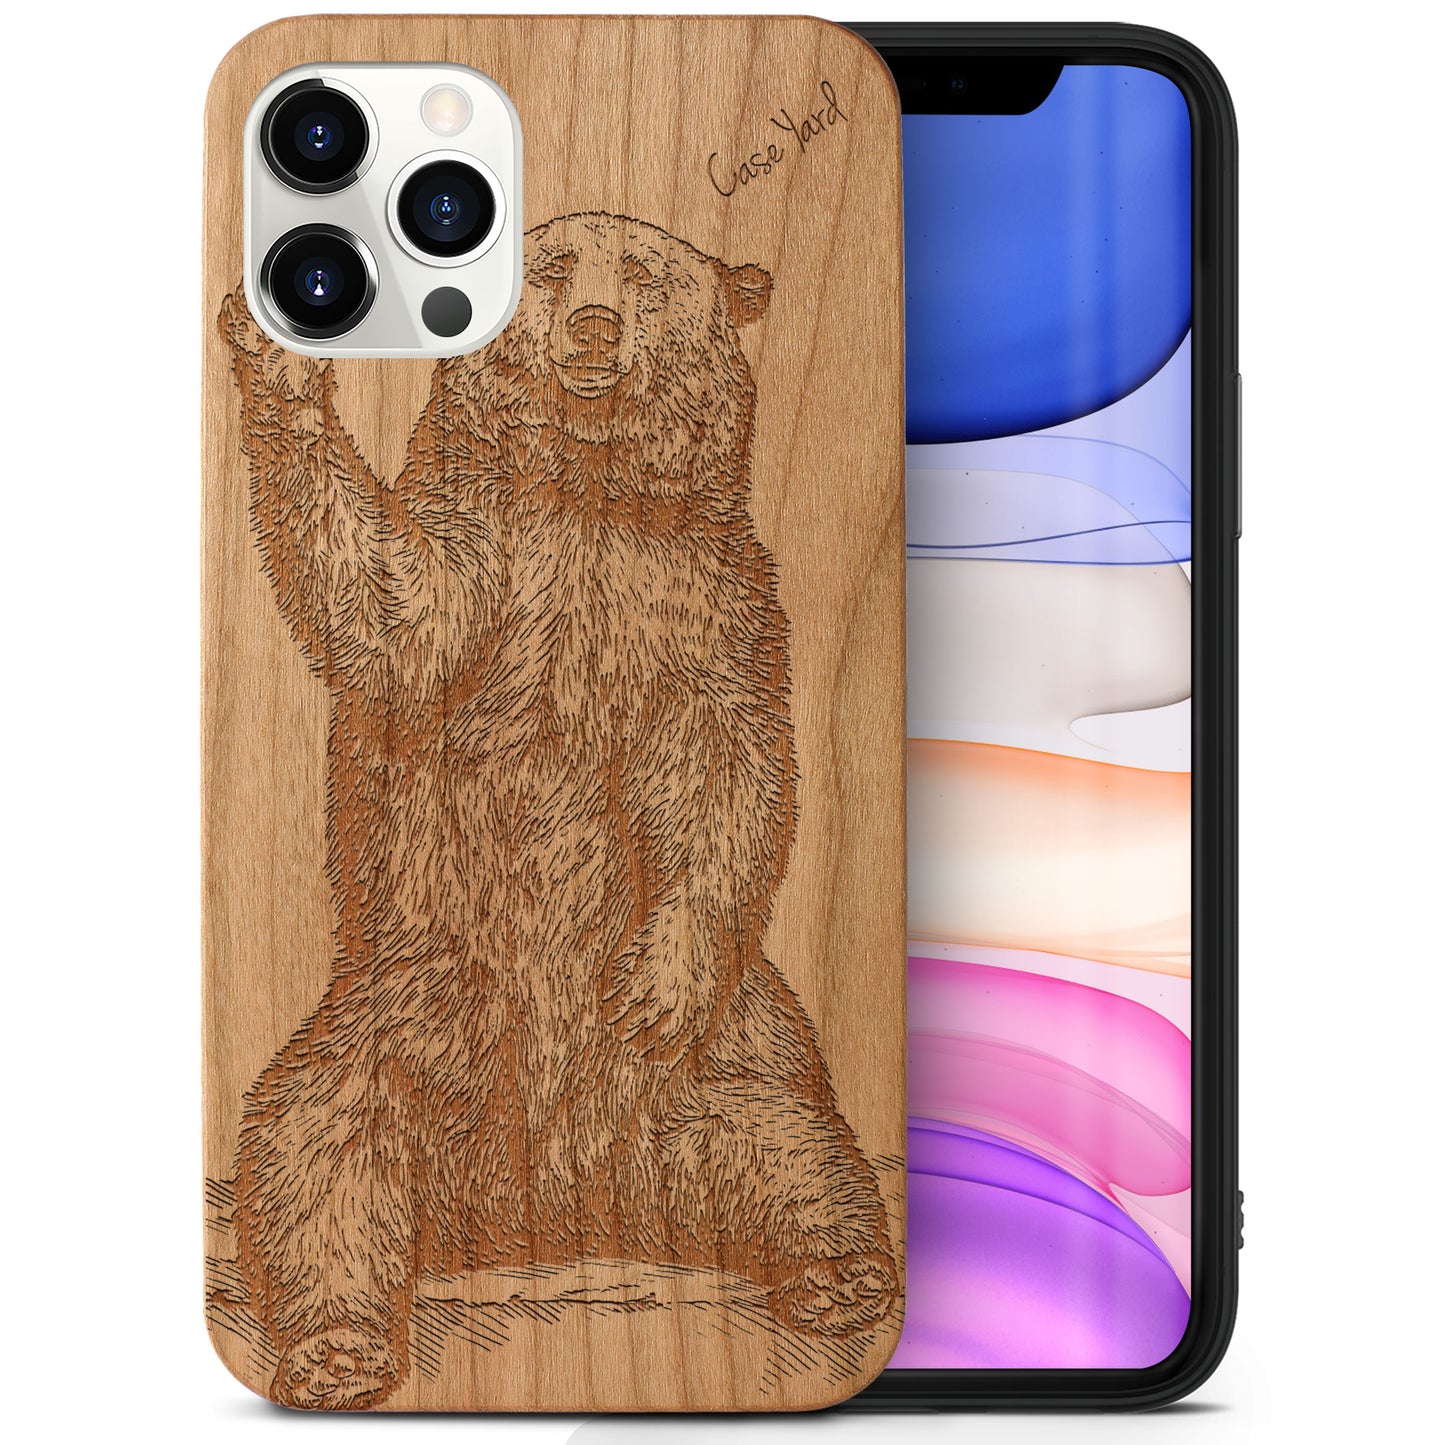 Wooden Cell Phone Case Cover, Laser Engraved case for iPhone & Samsung phone Grizzly Bear Design